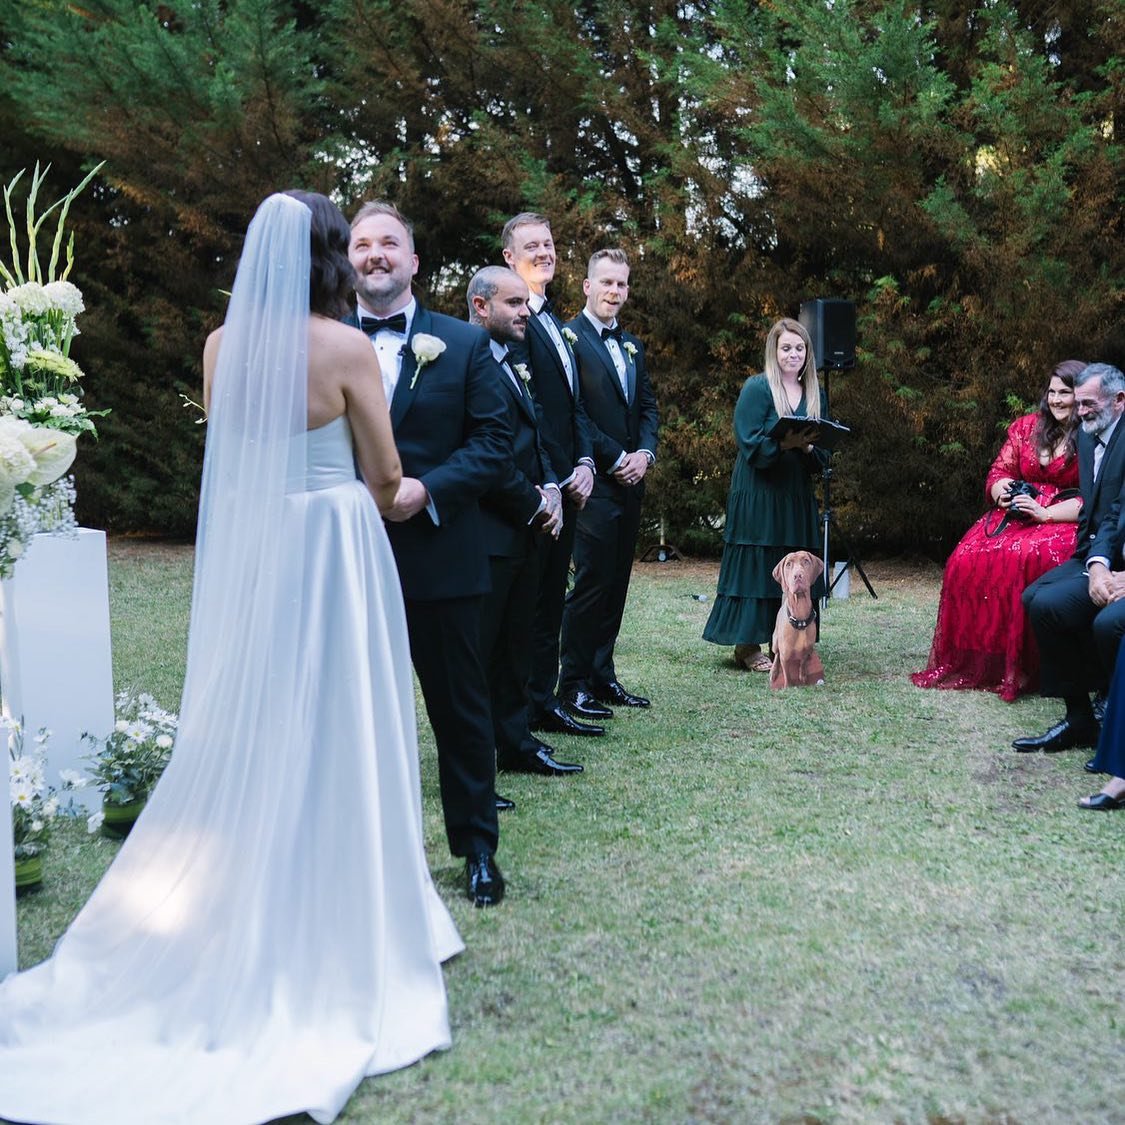 It&rsquo;s the unplanned, unscripted moments in a ceremony that I love most. By the look on @wazwazwaz_ &lsquo;s face, I was probably hanging shit on him about being a keen bean after he forgot to say his legal vows and launched straight into his own